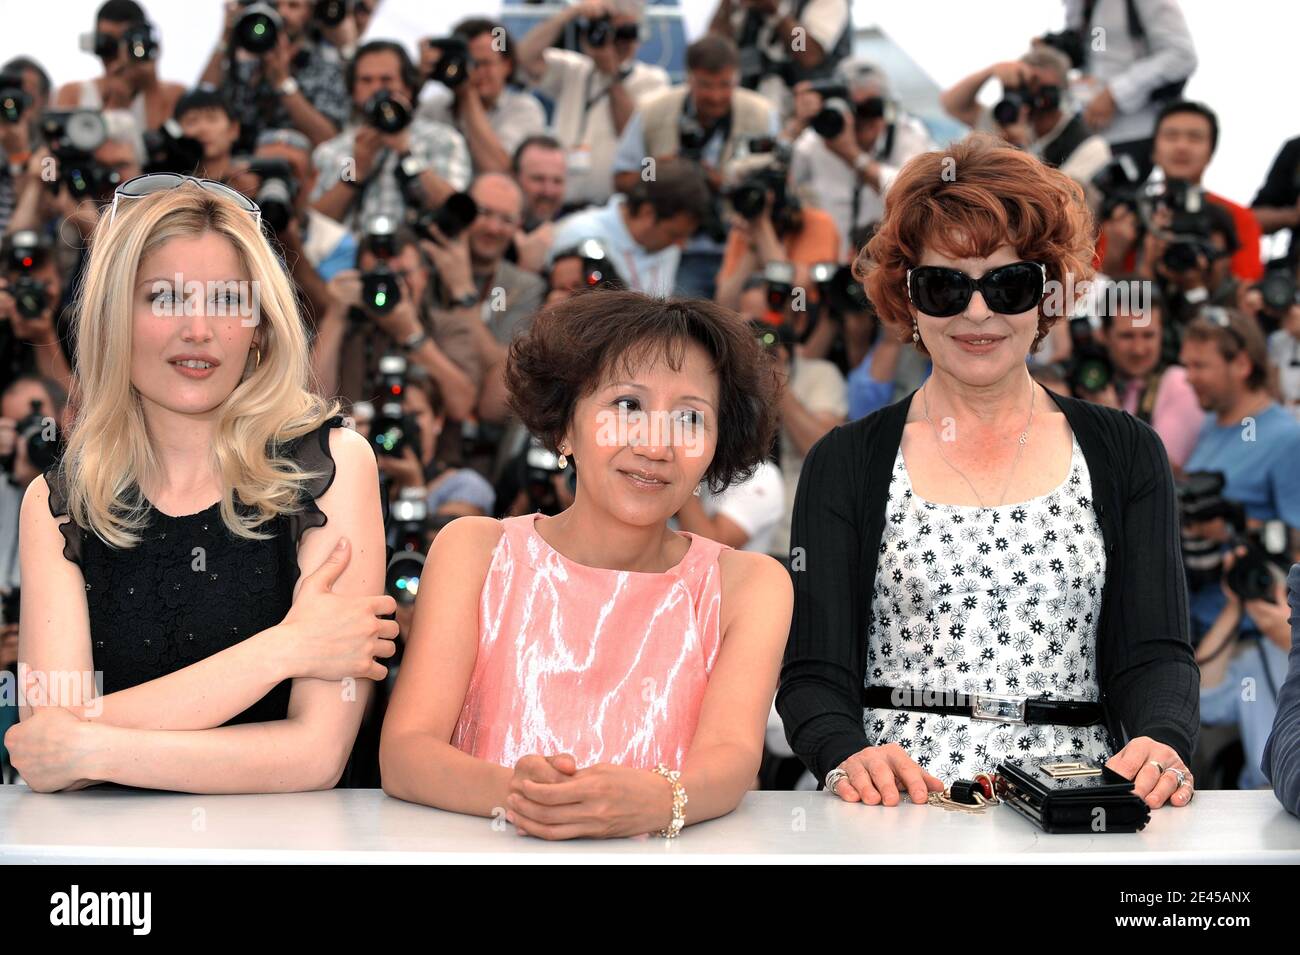 Laetitia Casta, Yi-Ching Lu, Fanny Ardant attend the 'Face' Photocall held at the Palais Des Festival during the 62nd International Cannes Film Festival in Cannes, France on May 23, 2009. Photo by Nebinger-Orban/ABACAPRESS.COM Stock Photo